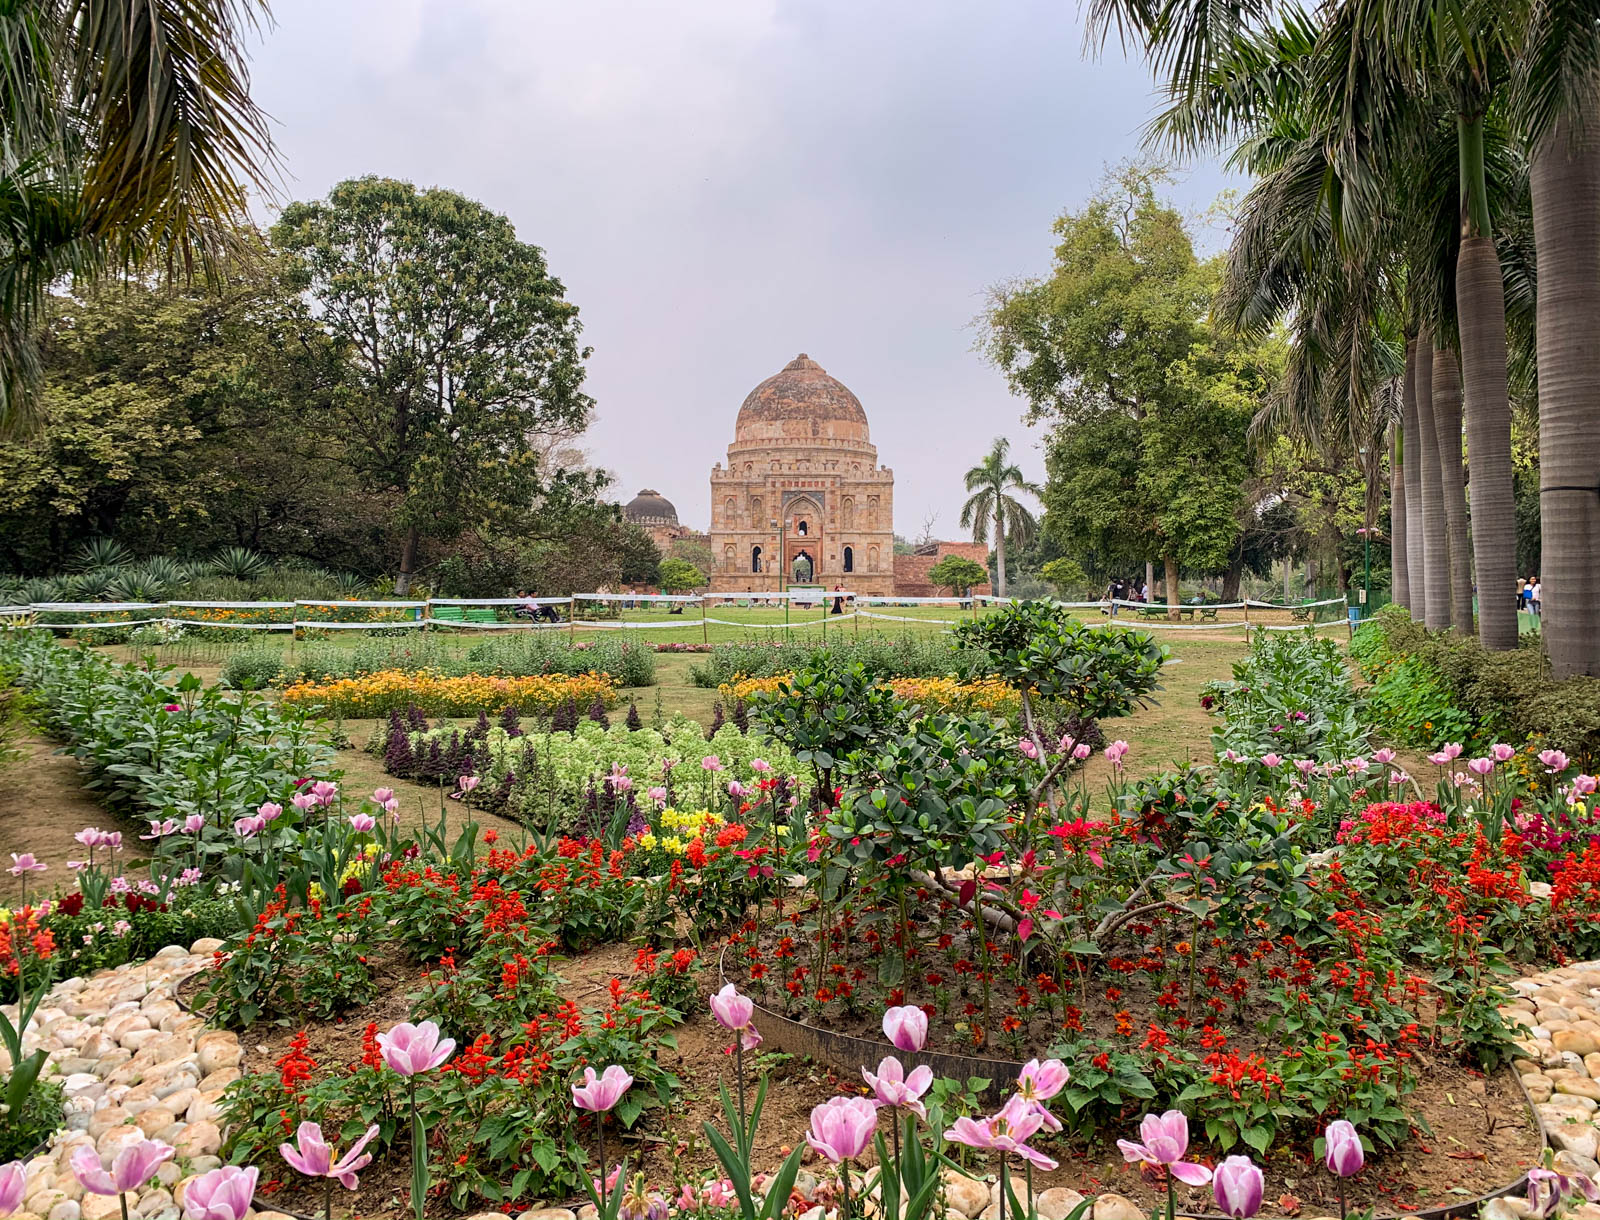 A mausoleum in the middle of a public park in Delhi